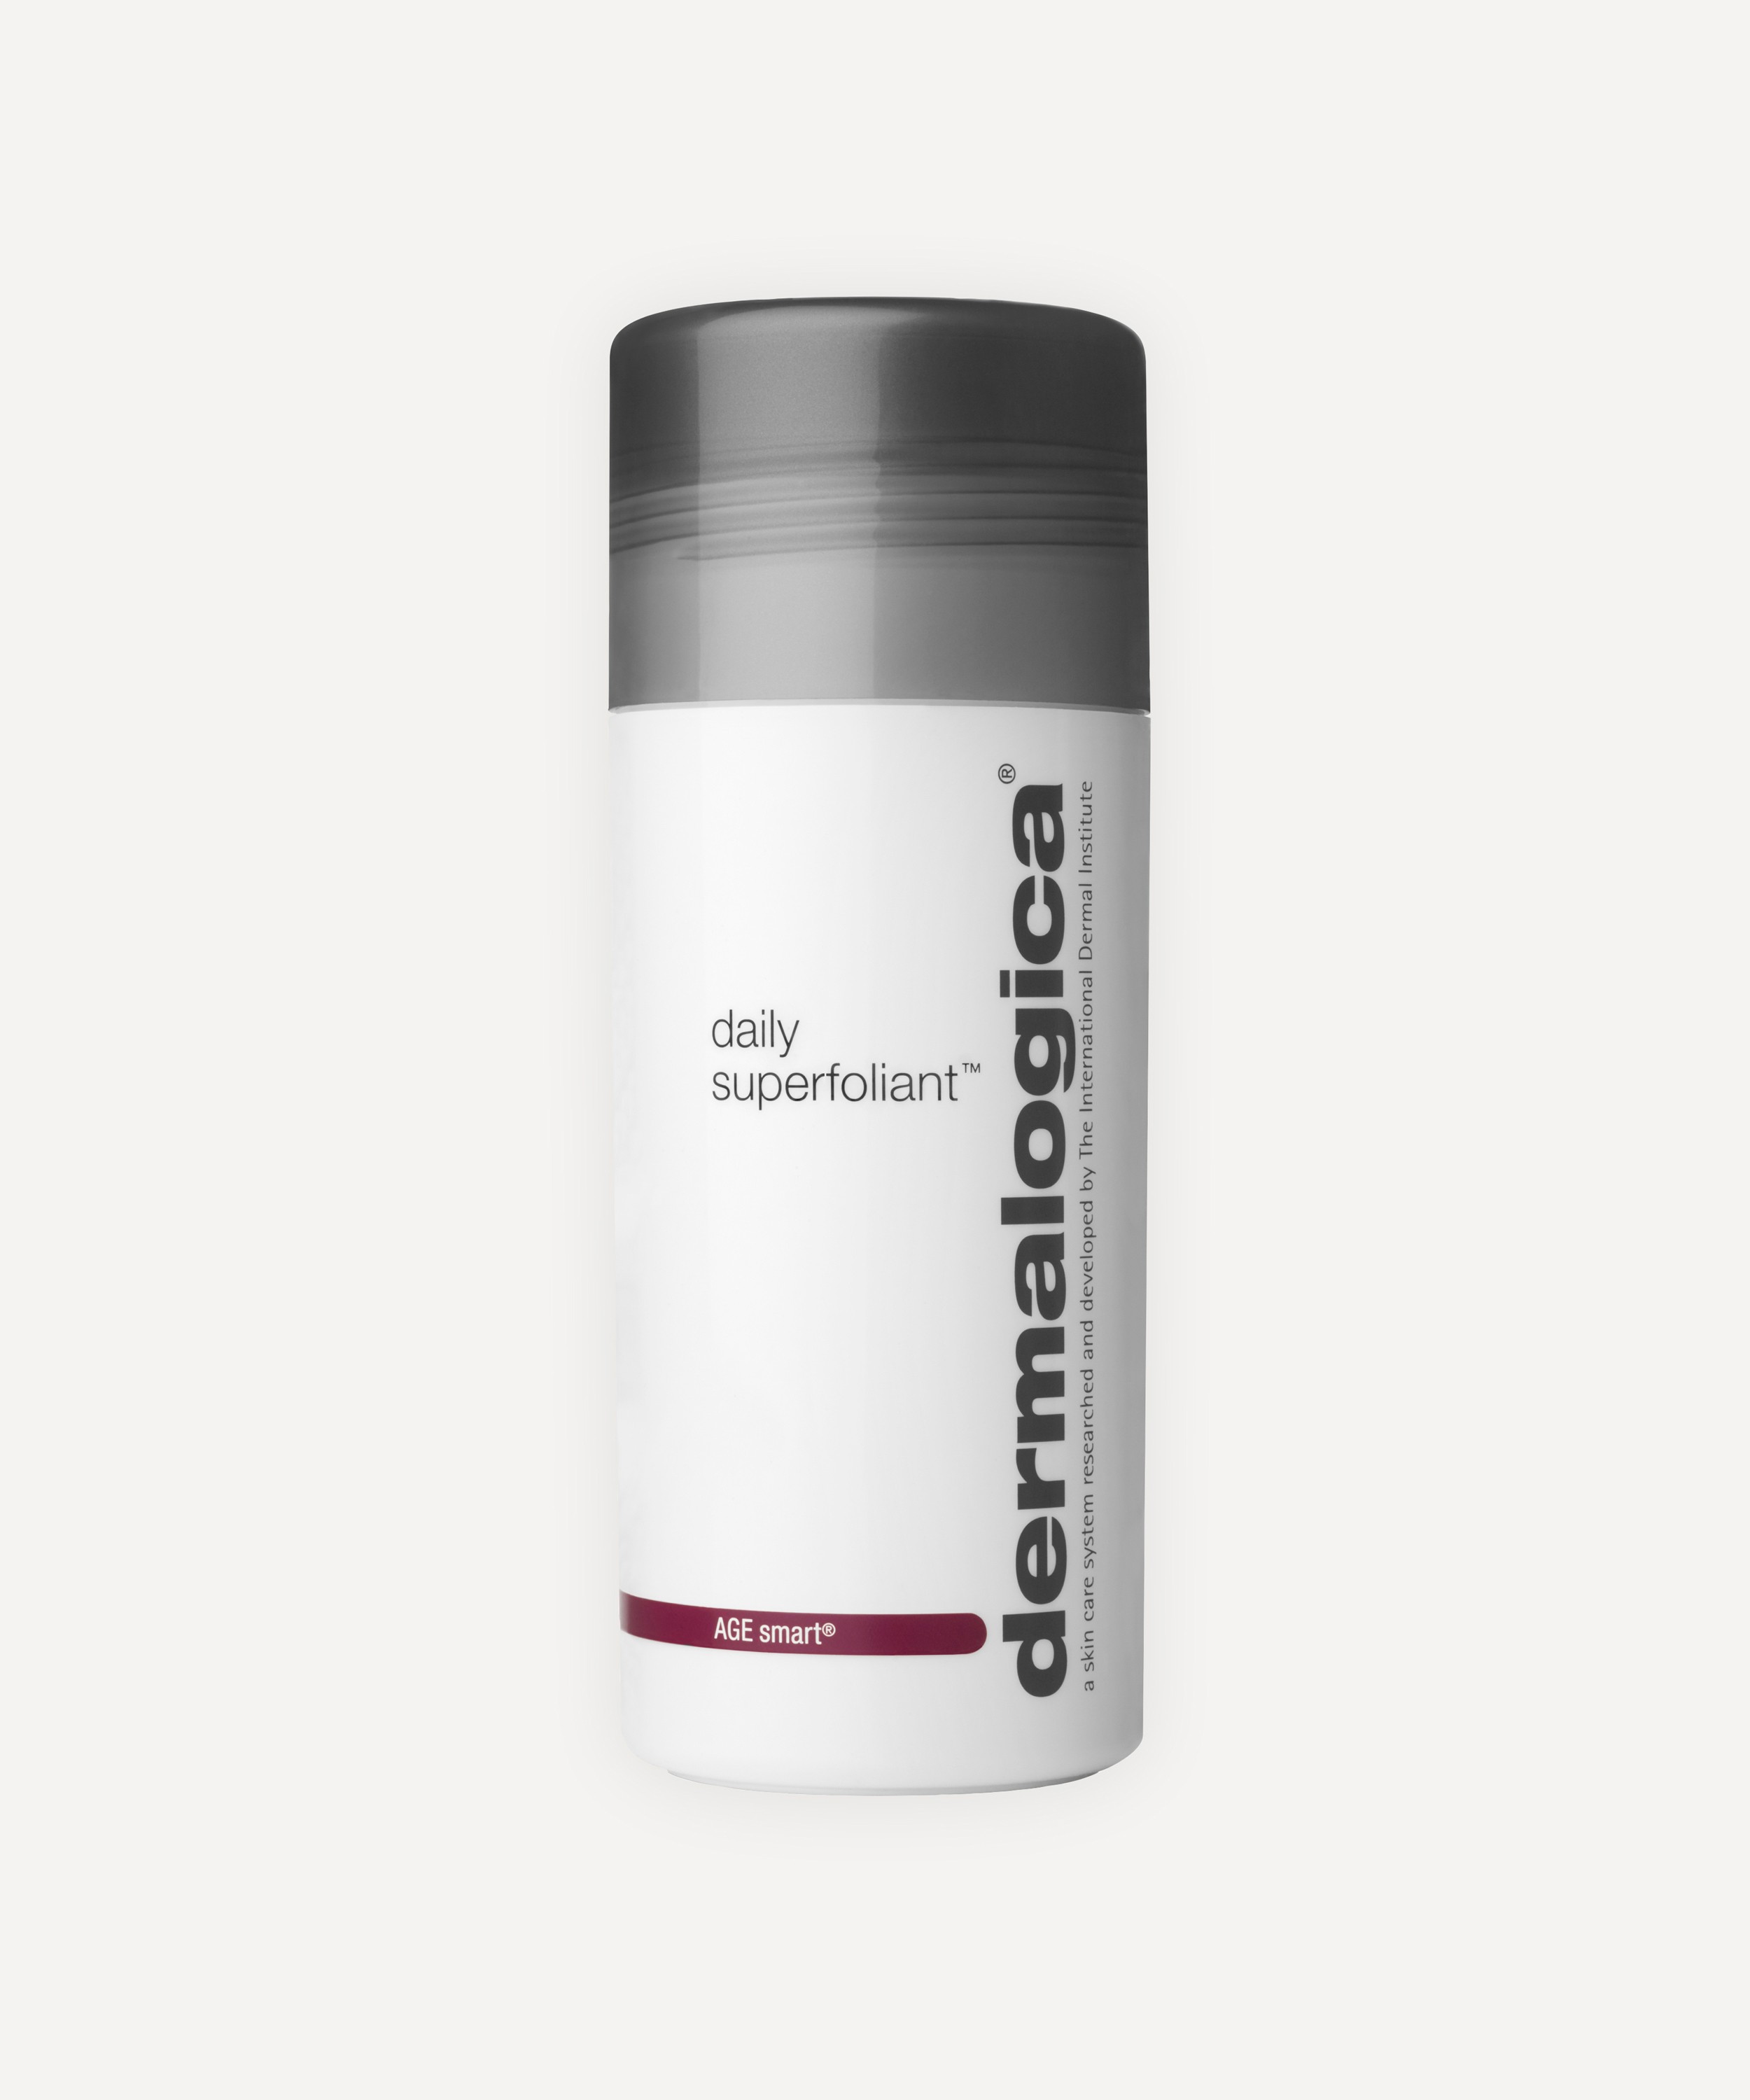 Dermalogica - Daily Superfoliant 57g image number 0